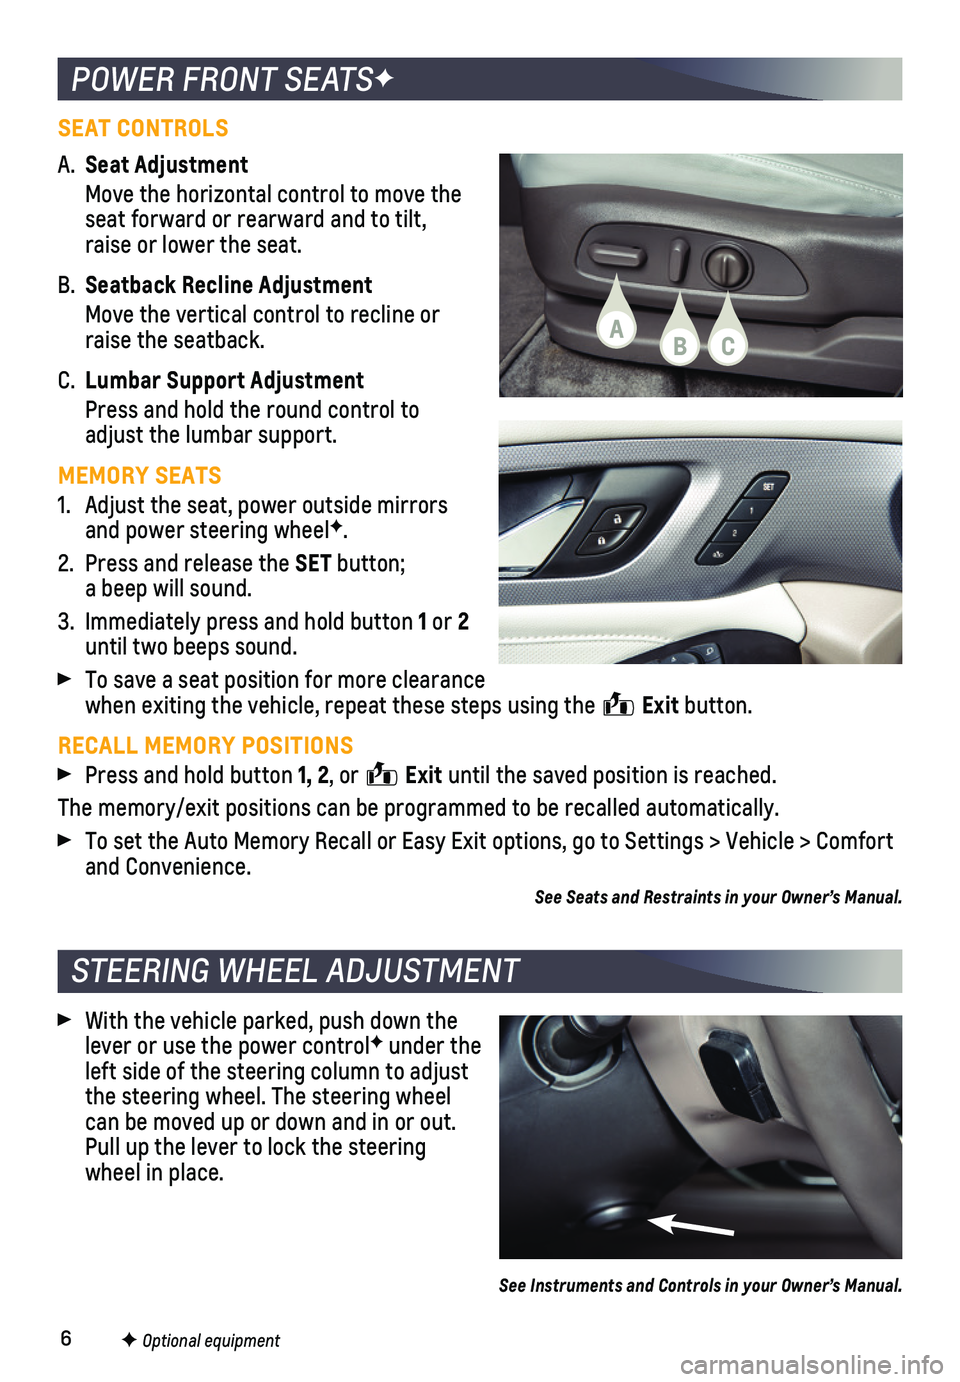 CHEVROLET TRAVERSE 2019  Get To Know Guide 6
POWER FRONT SEATSF
STEERING WHEEL ADJUSTMENT
F Optional equipment
SEAT CONTROLS
A. Seat Adjustment
 Move the horizontal control to move the seat forward or rearward and to tilt, raise or lower the 